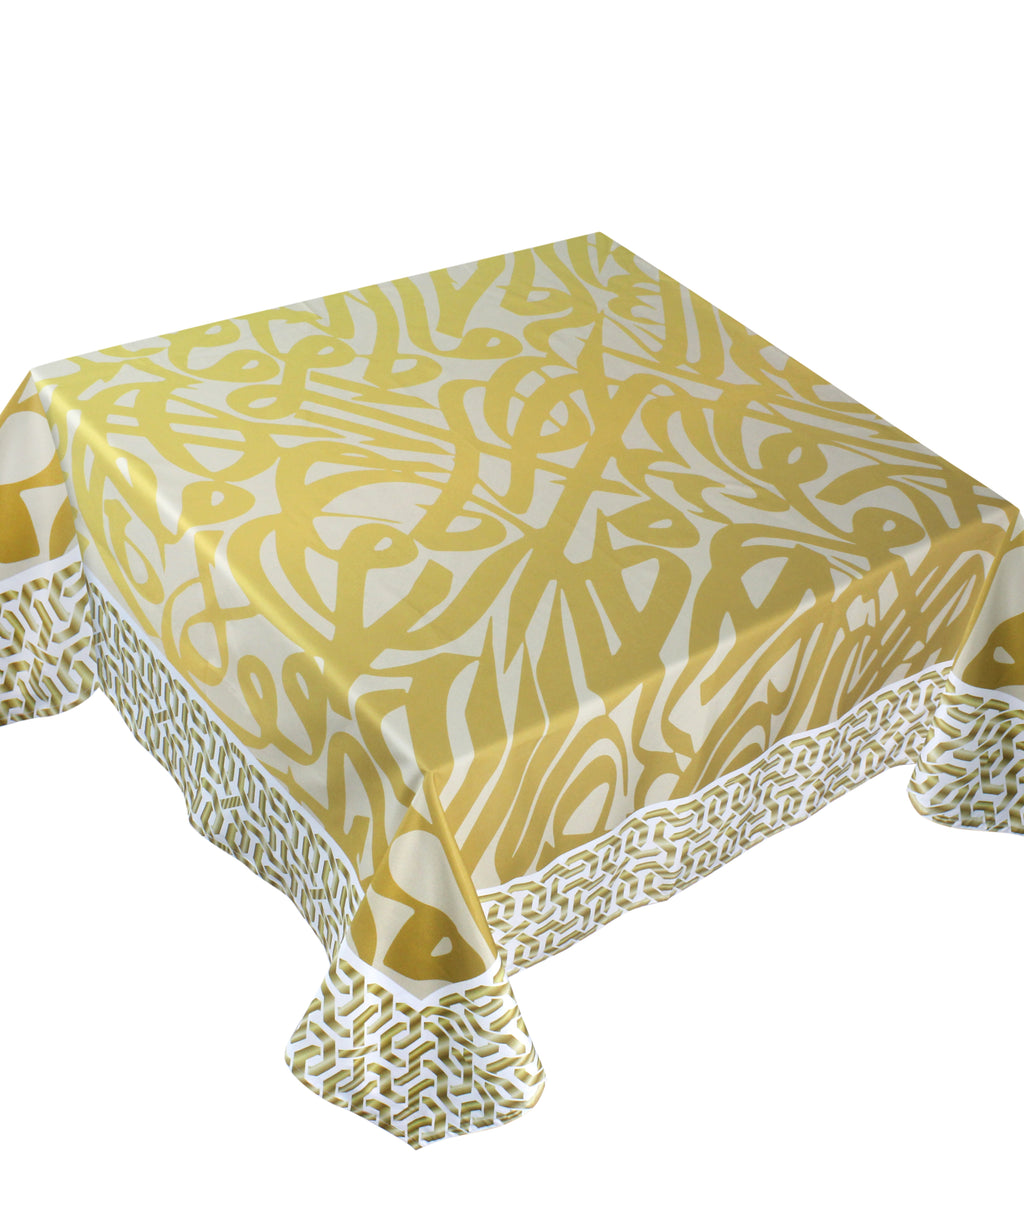 The Golden calligraphy table cover